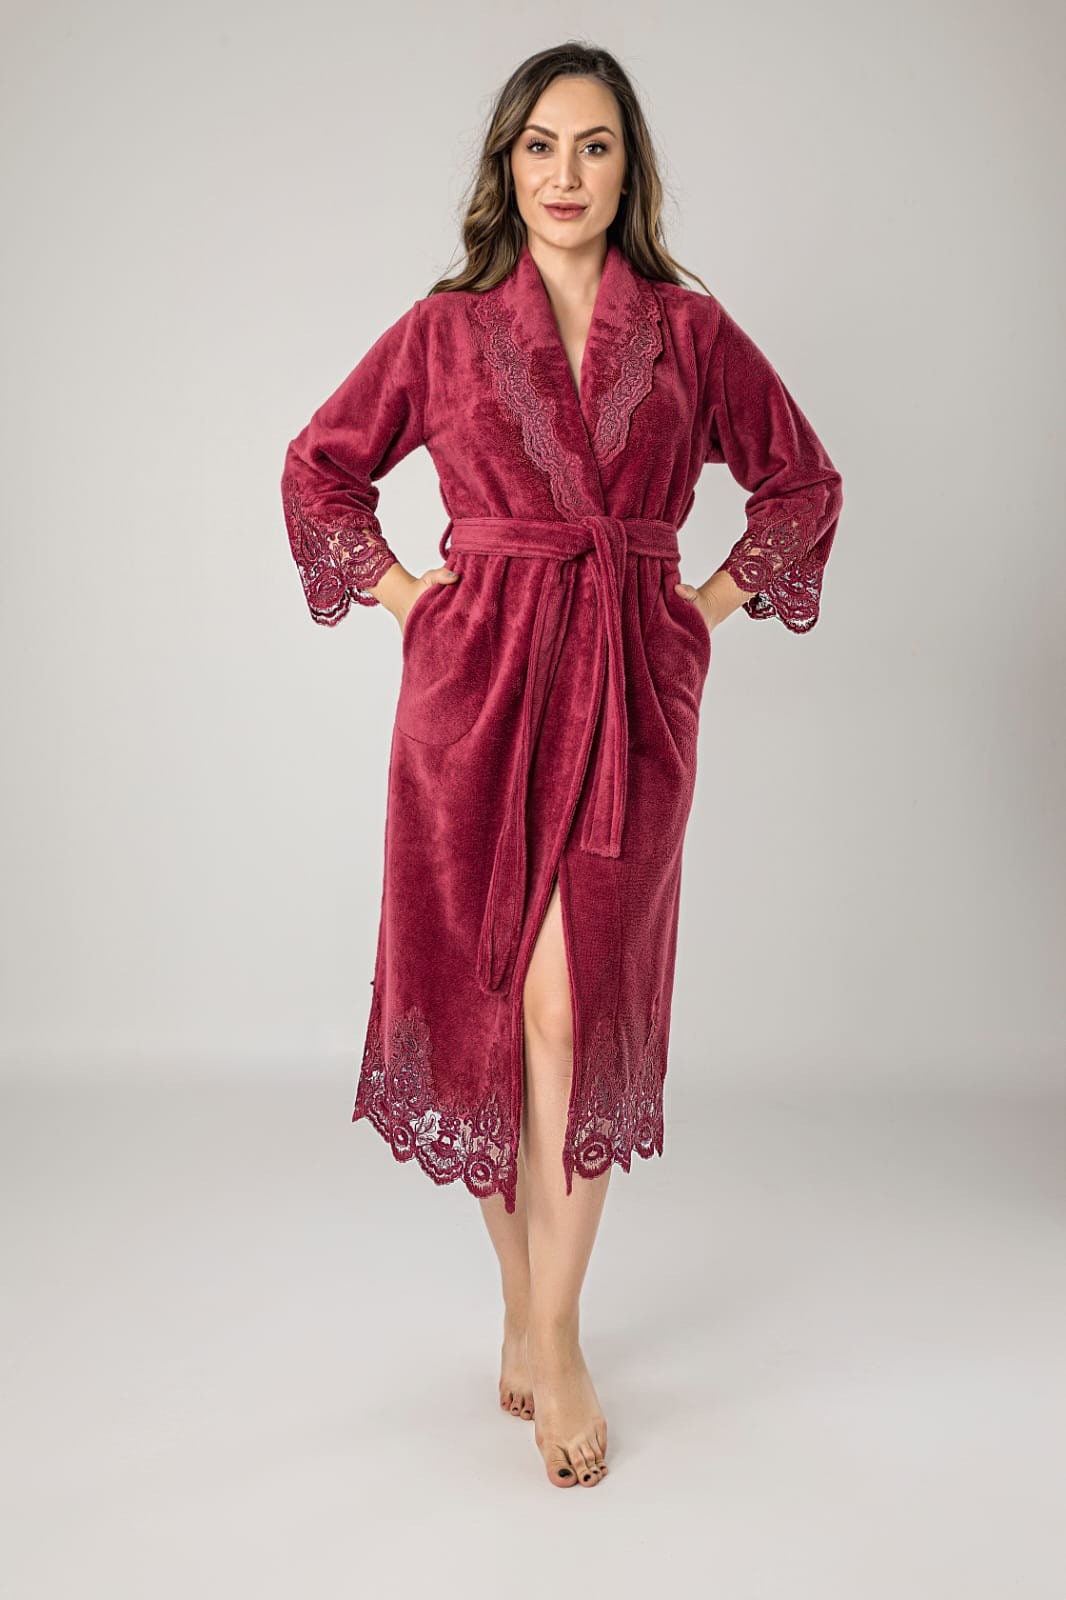 Satin and lace dressing gown - Dark red - Ladies | H&M IN